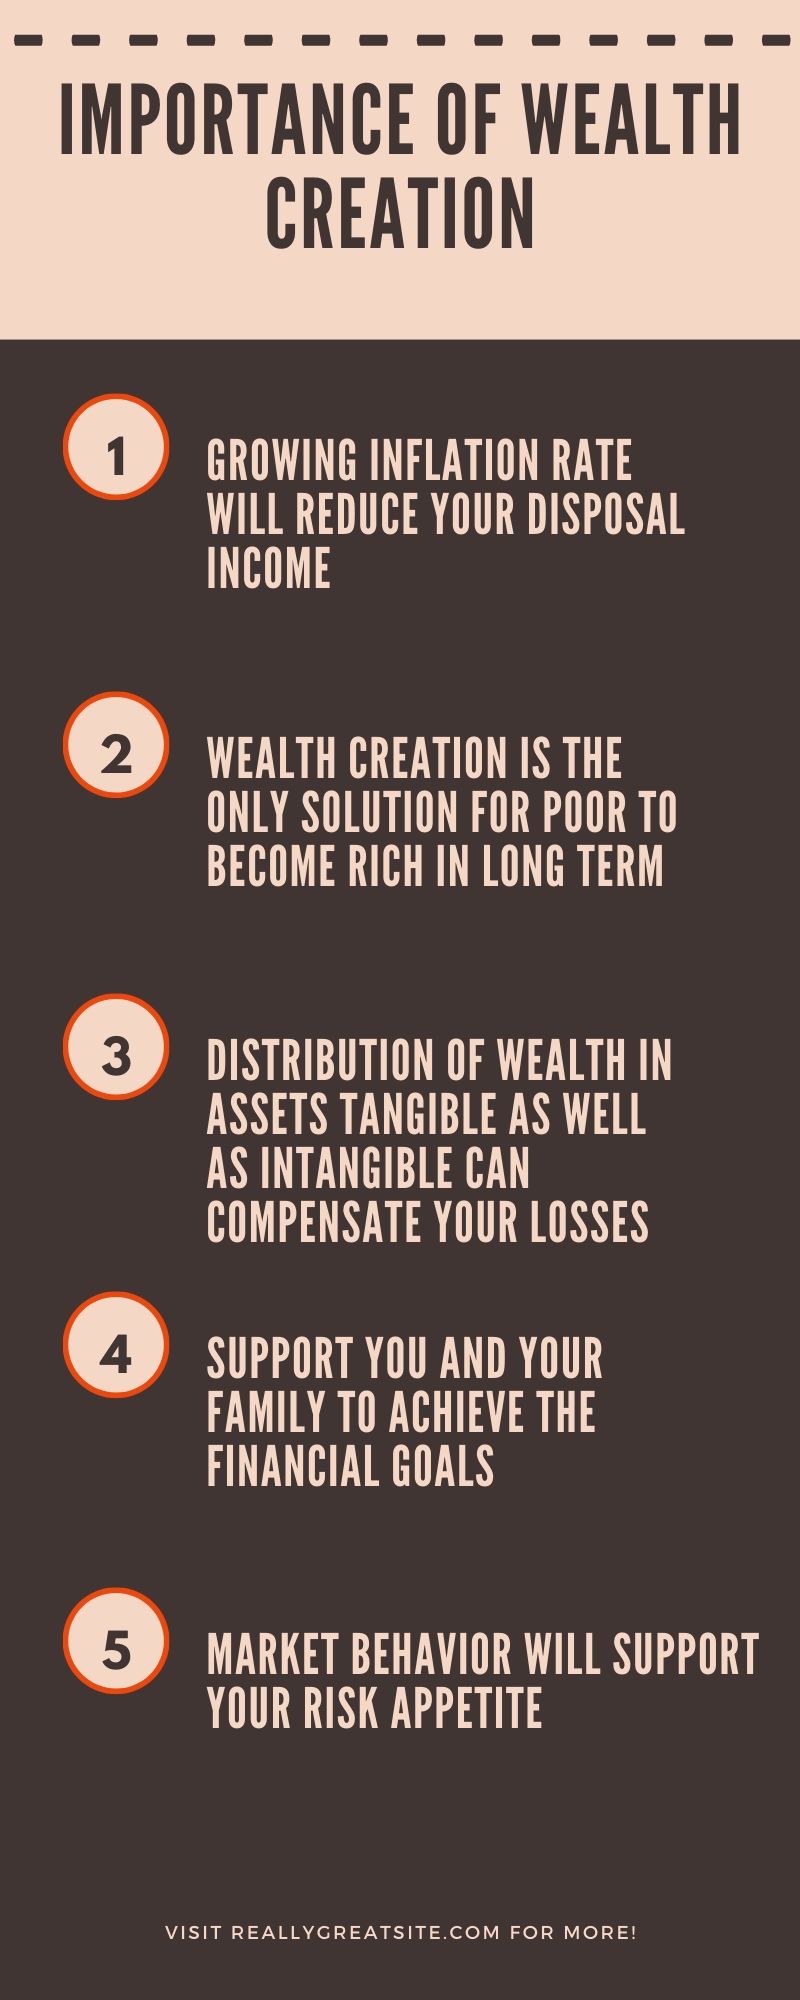 Importance of wealth creation 